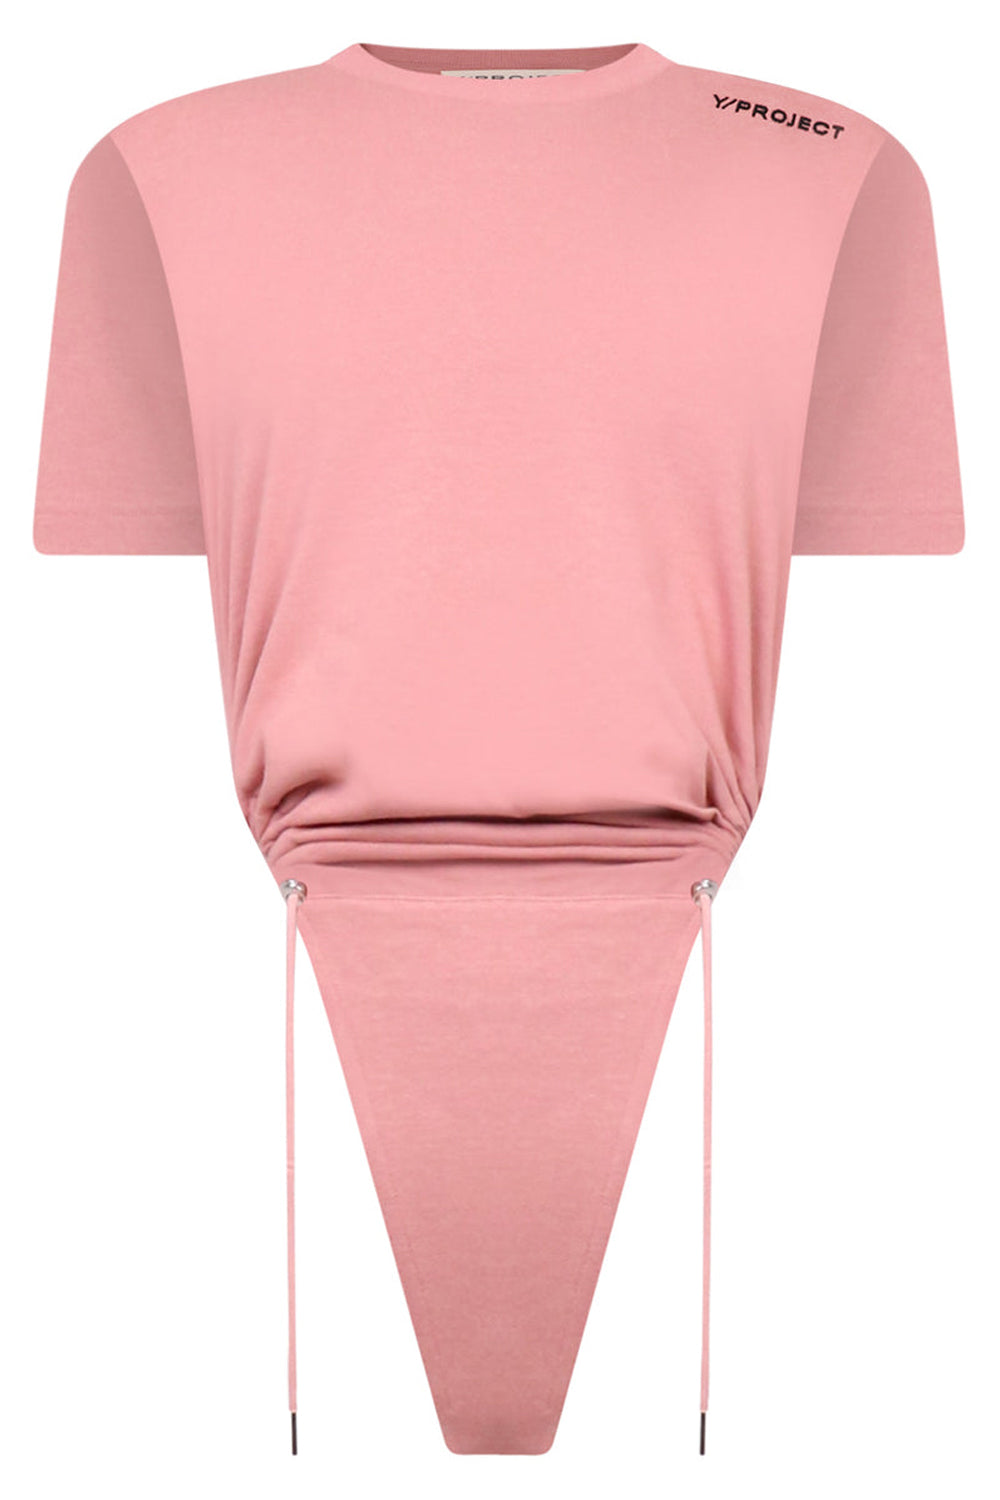 Y/PROJECT T-SHIRTS RUCHED BODY T-SHIRT | PEACH